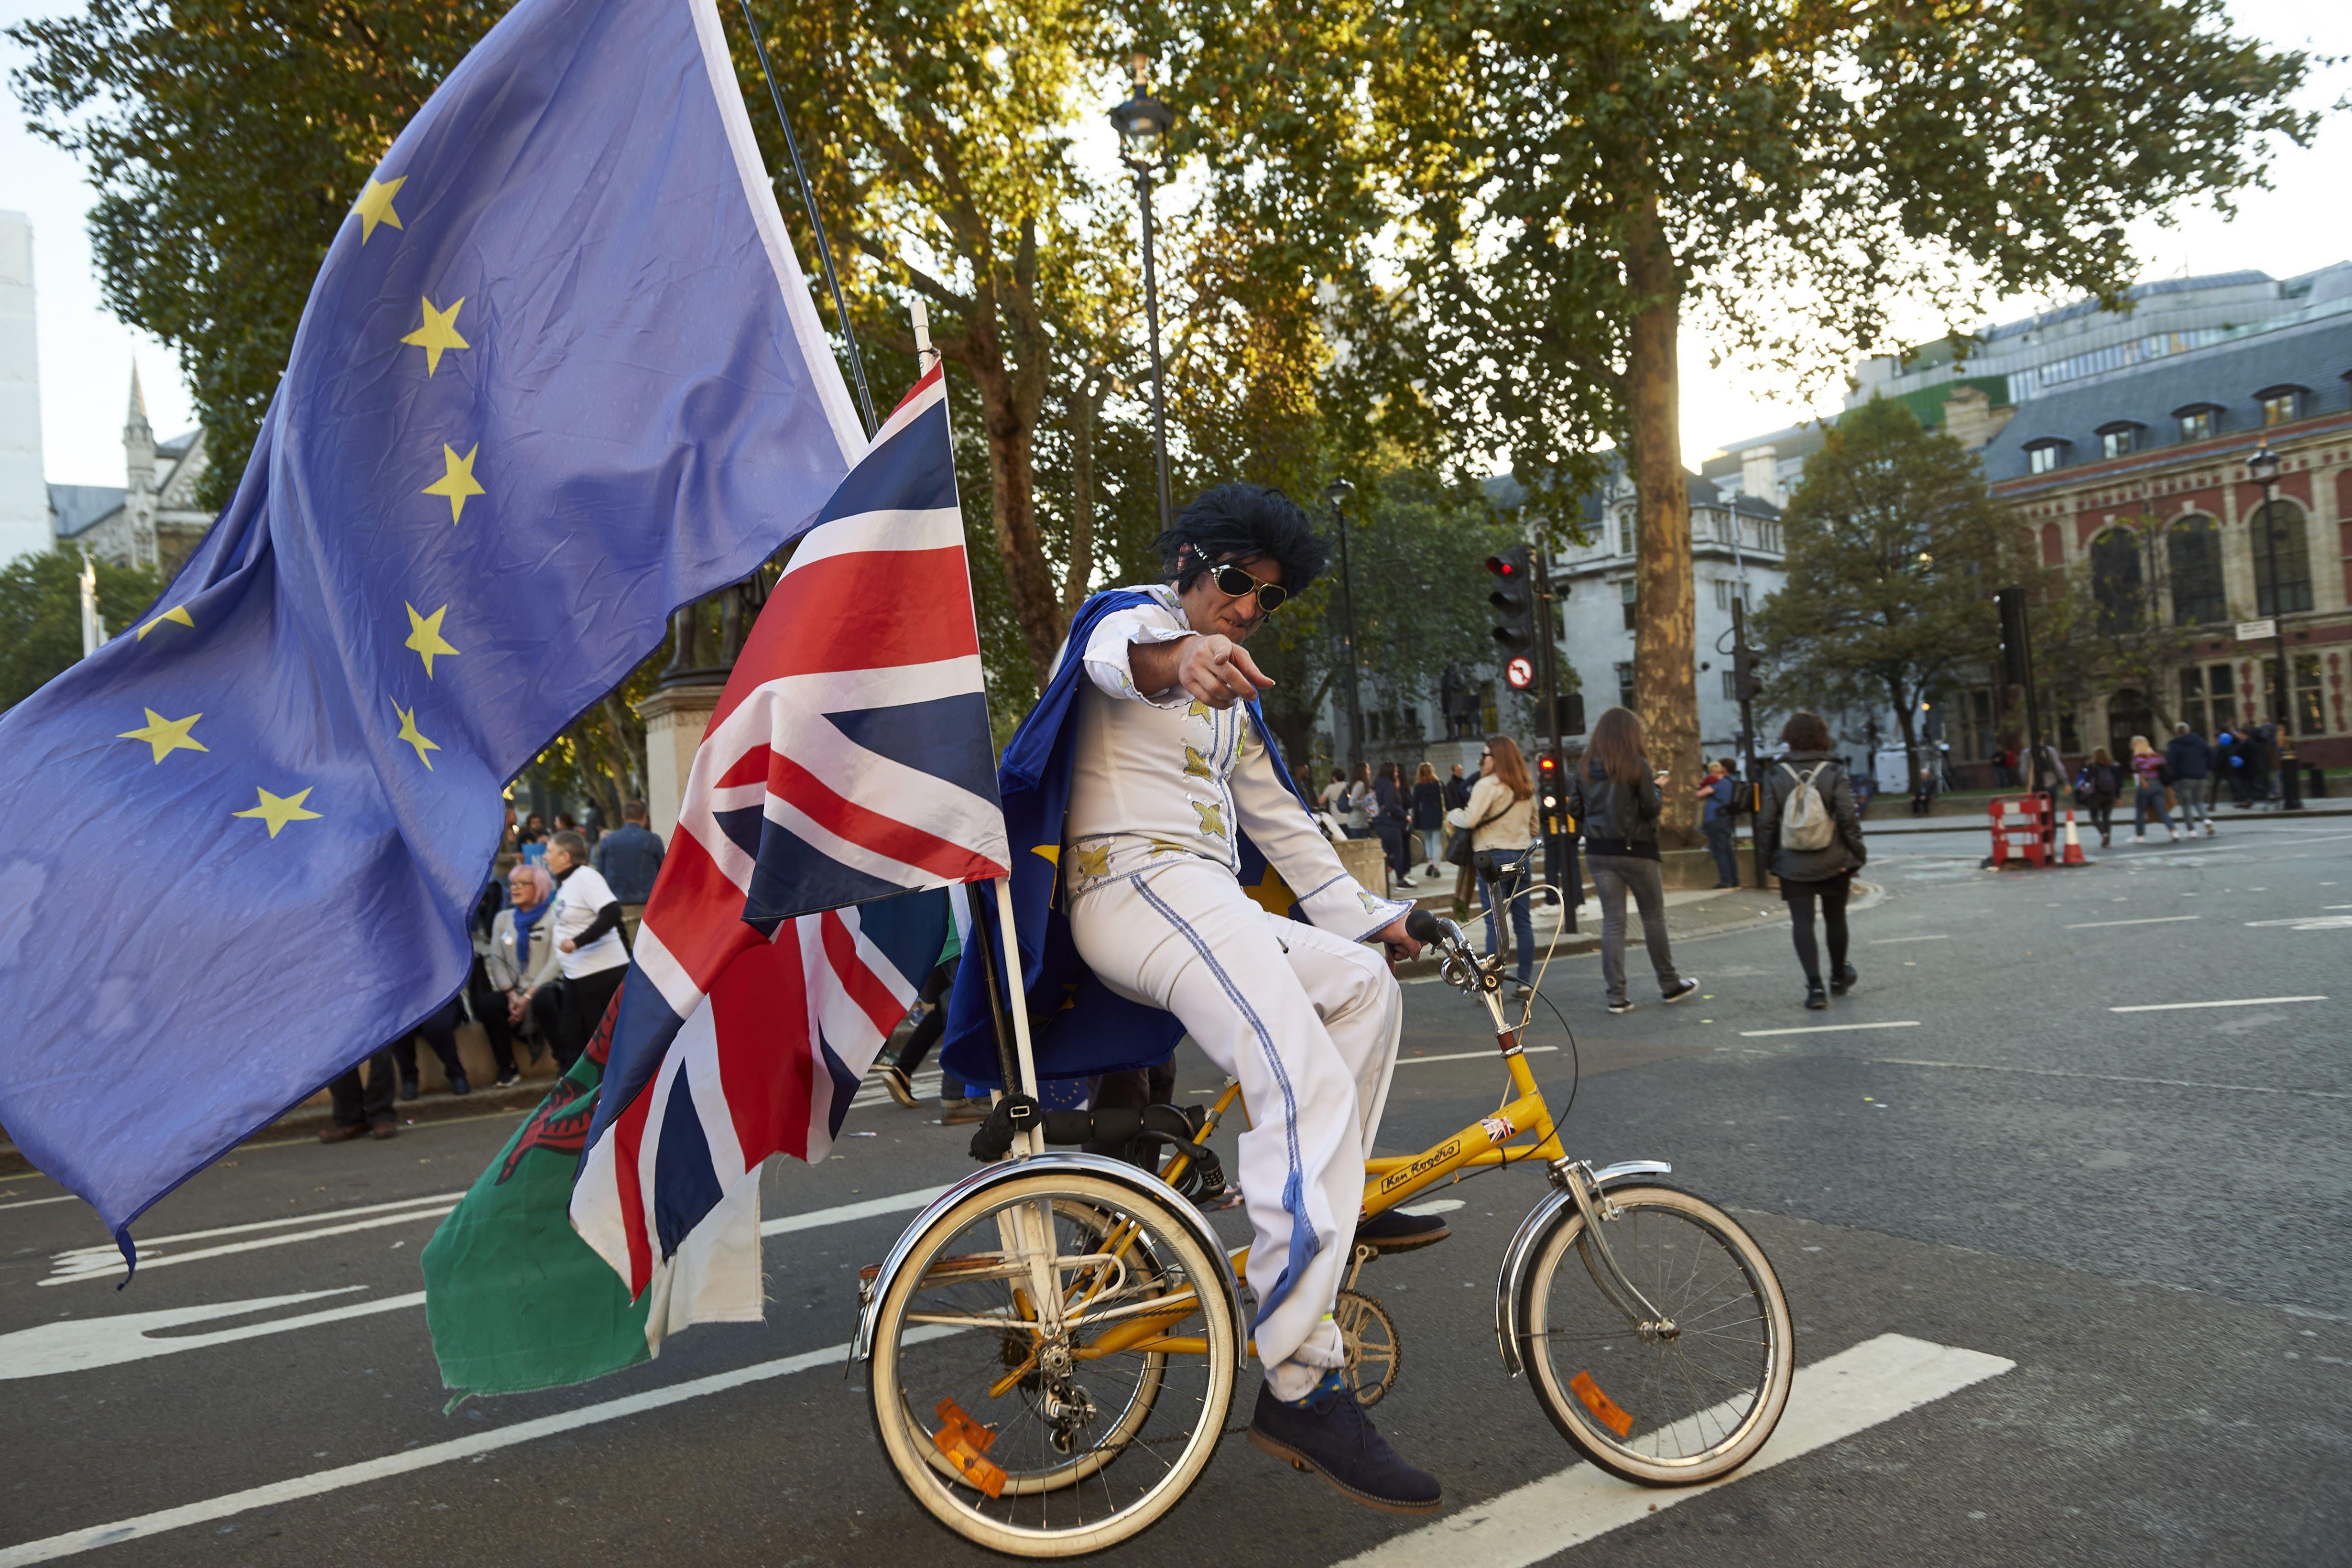 A man dressed as Elvis cycles on a tricycle with European Union, Union Jack, and Welsh flags. 